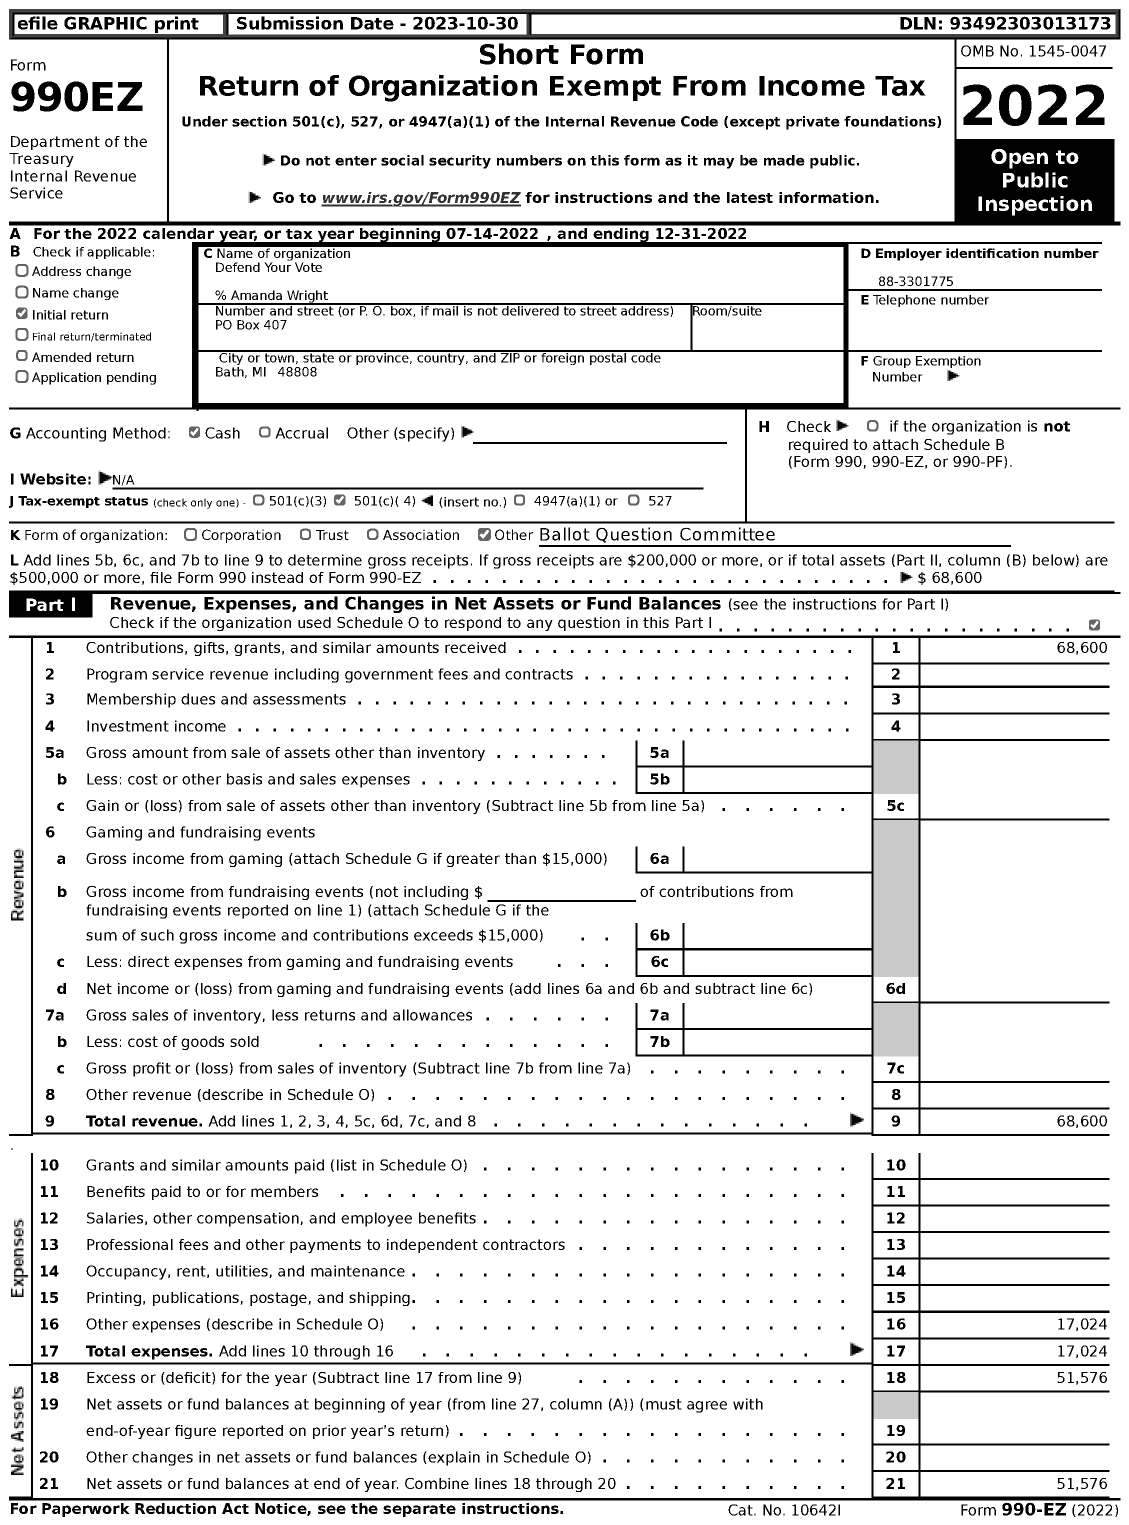 Image of first page of 2022 Form 990EZ for Defend Your Vote